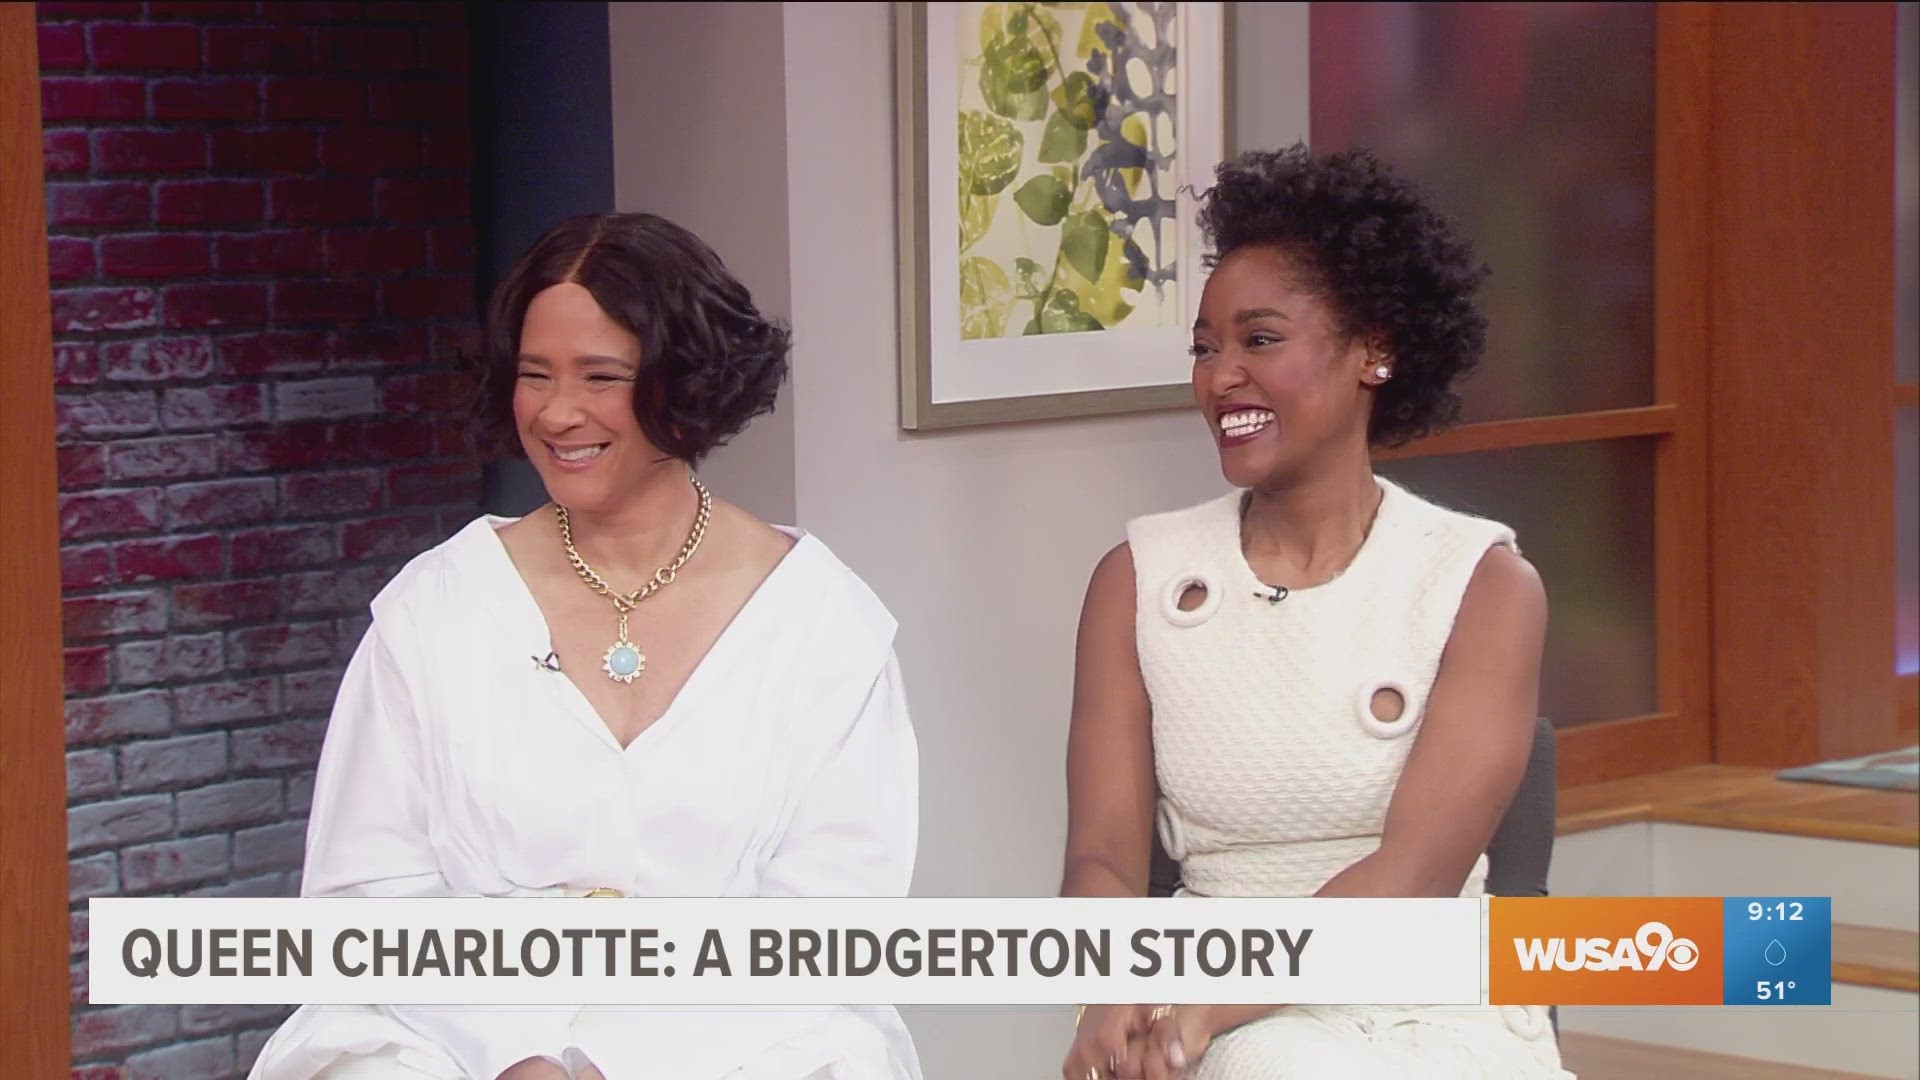 Ellen sits down with actresses Golda Rosheuvel & Arsema Thomas to discuss the new series 'Queen Charlotte: A Bridgerton Story' that premieres on Netflix May 4, 2023.